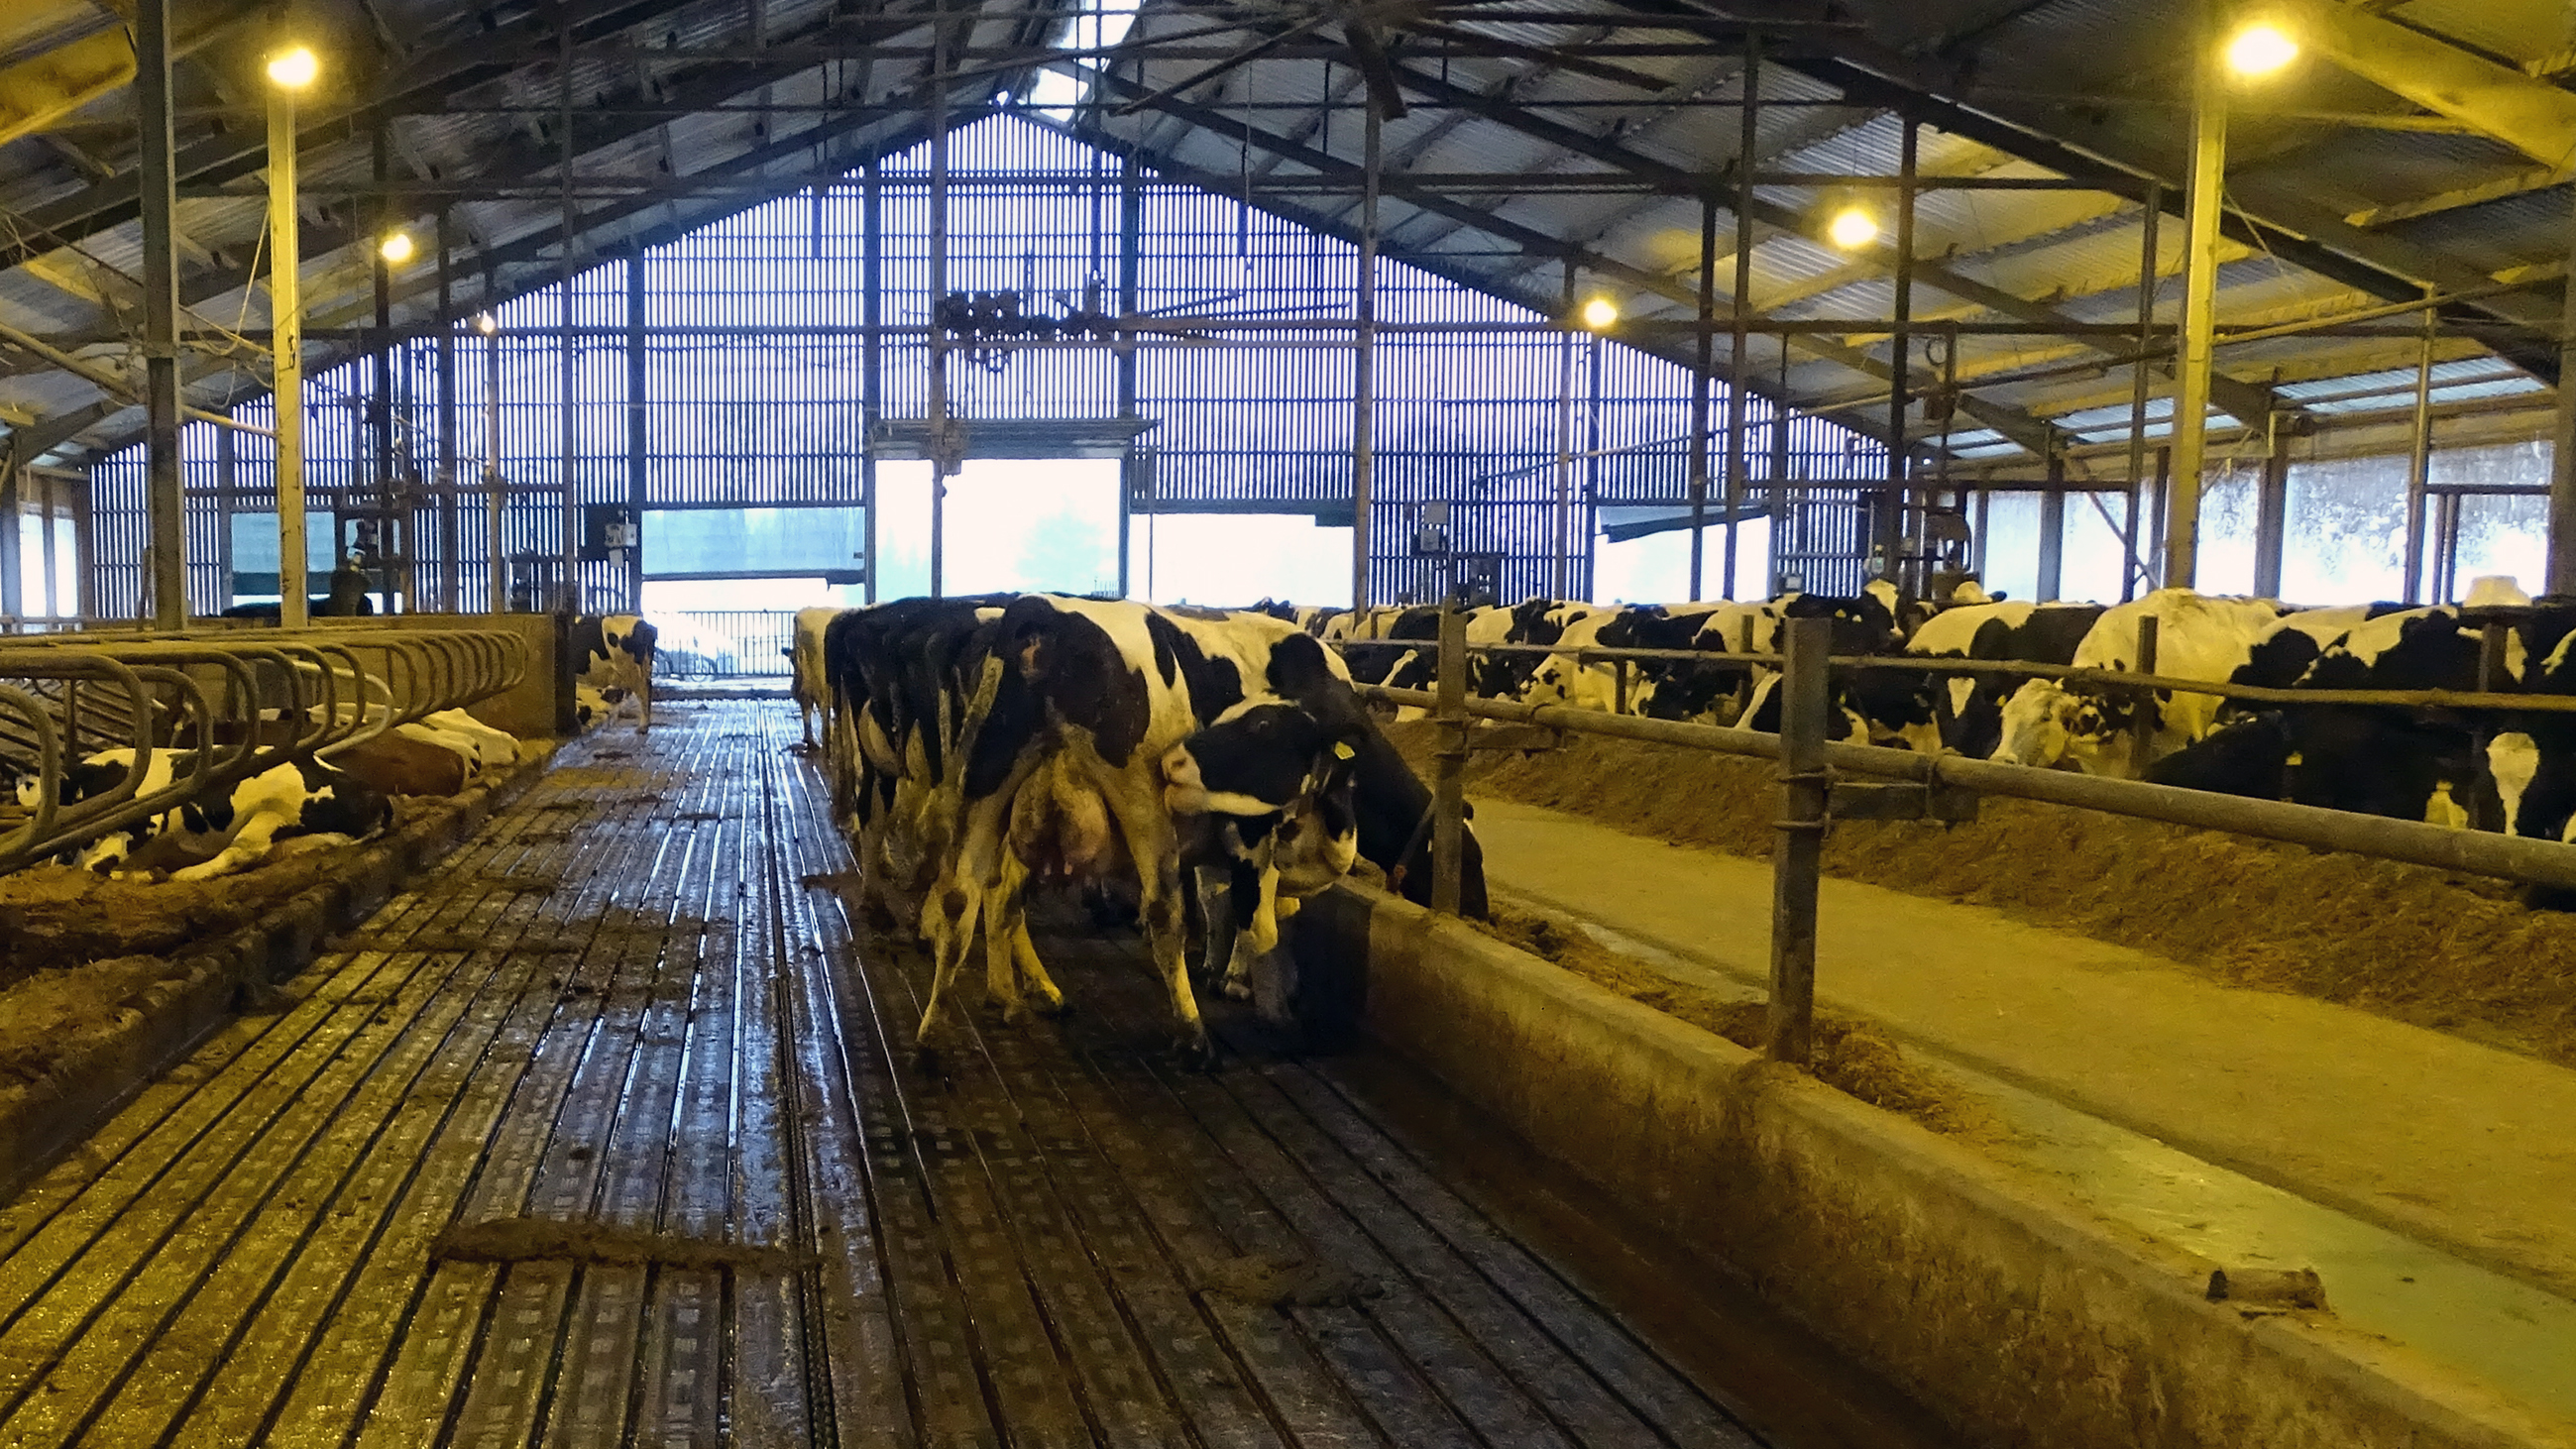 Barn design of the future: Innovative floor surfaces for lower emissions (Photo: ATB)